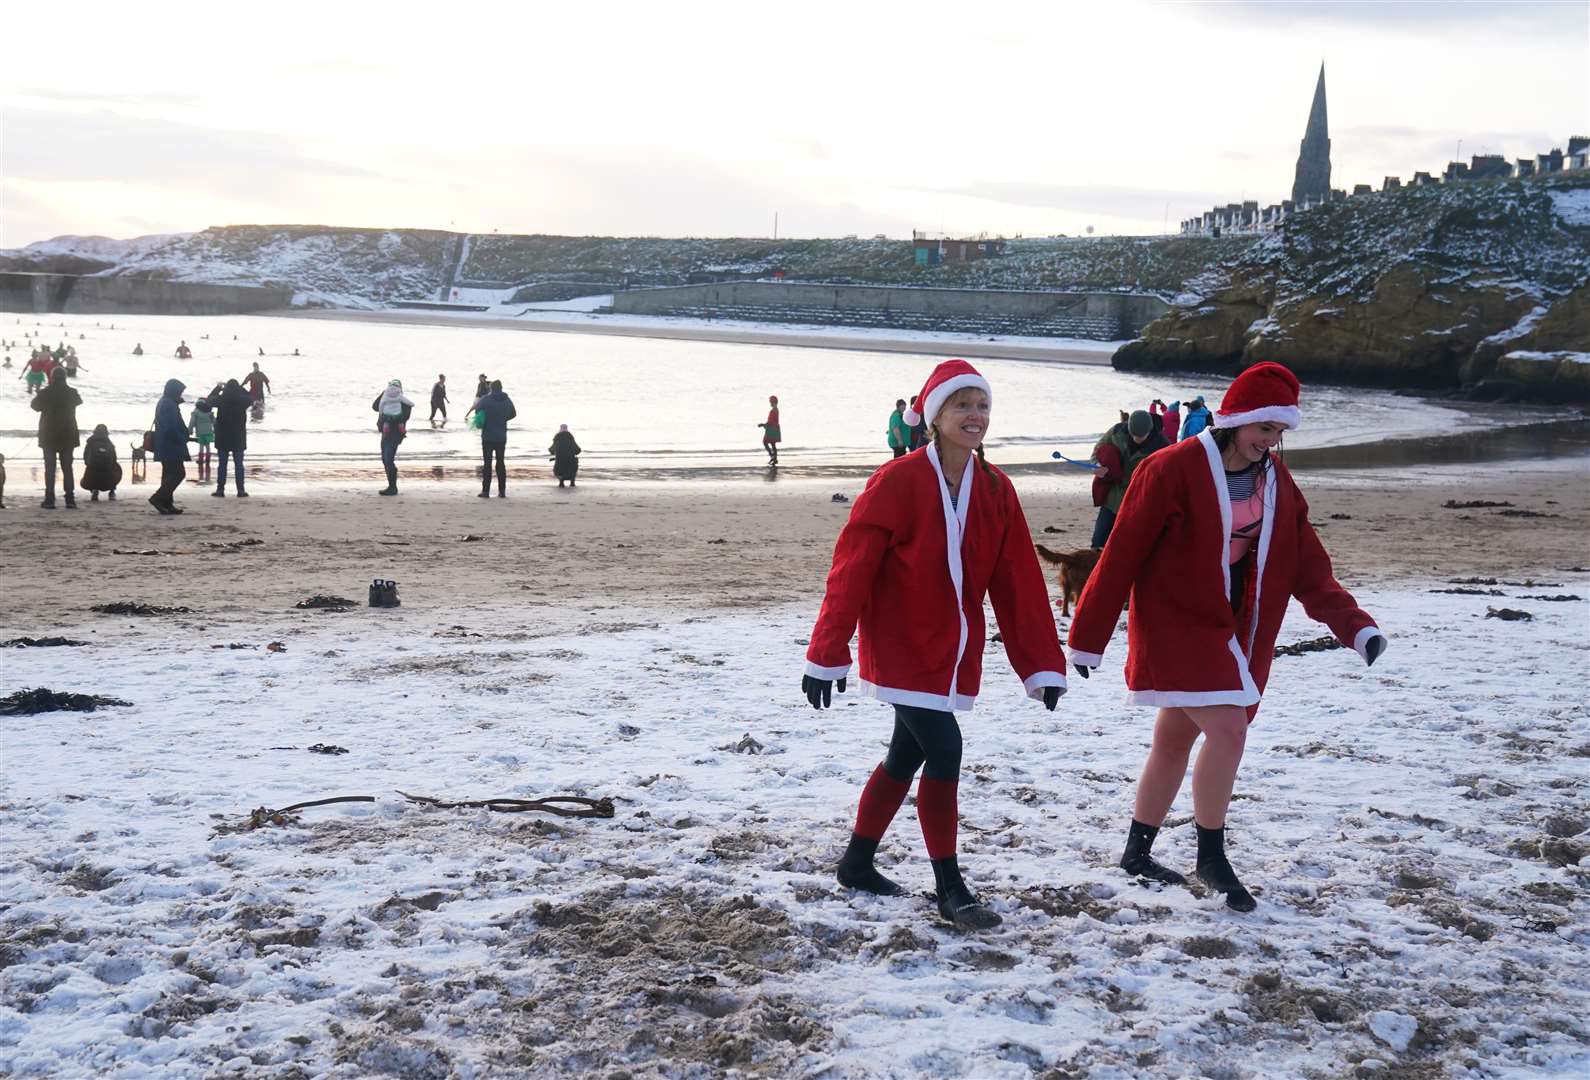 Cold water swimmers walk on a snow-covered beach at Cullercoats Bay on the North East coast (Owen Humphreys/PA)